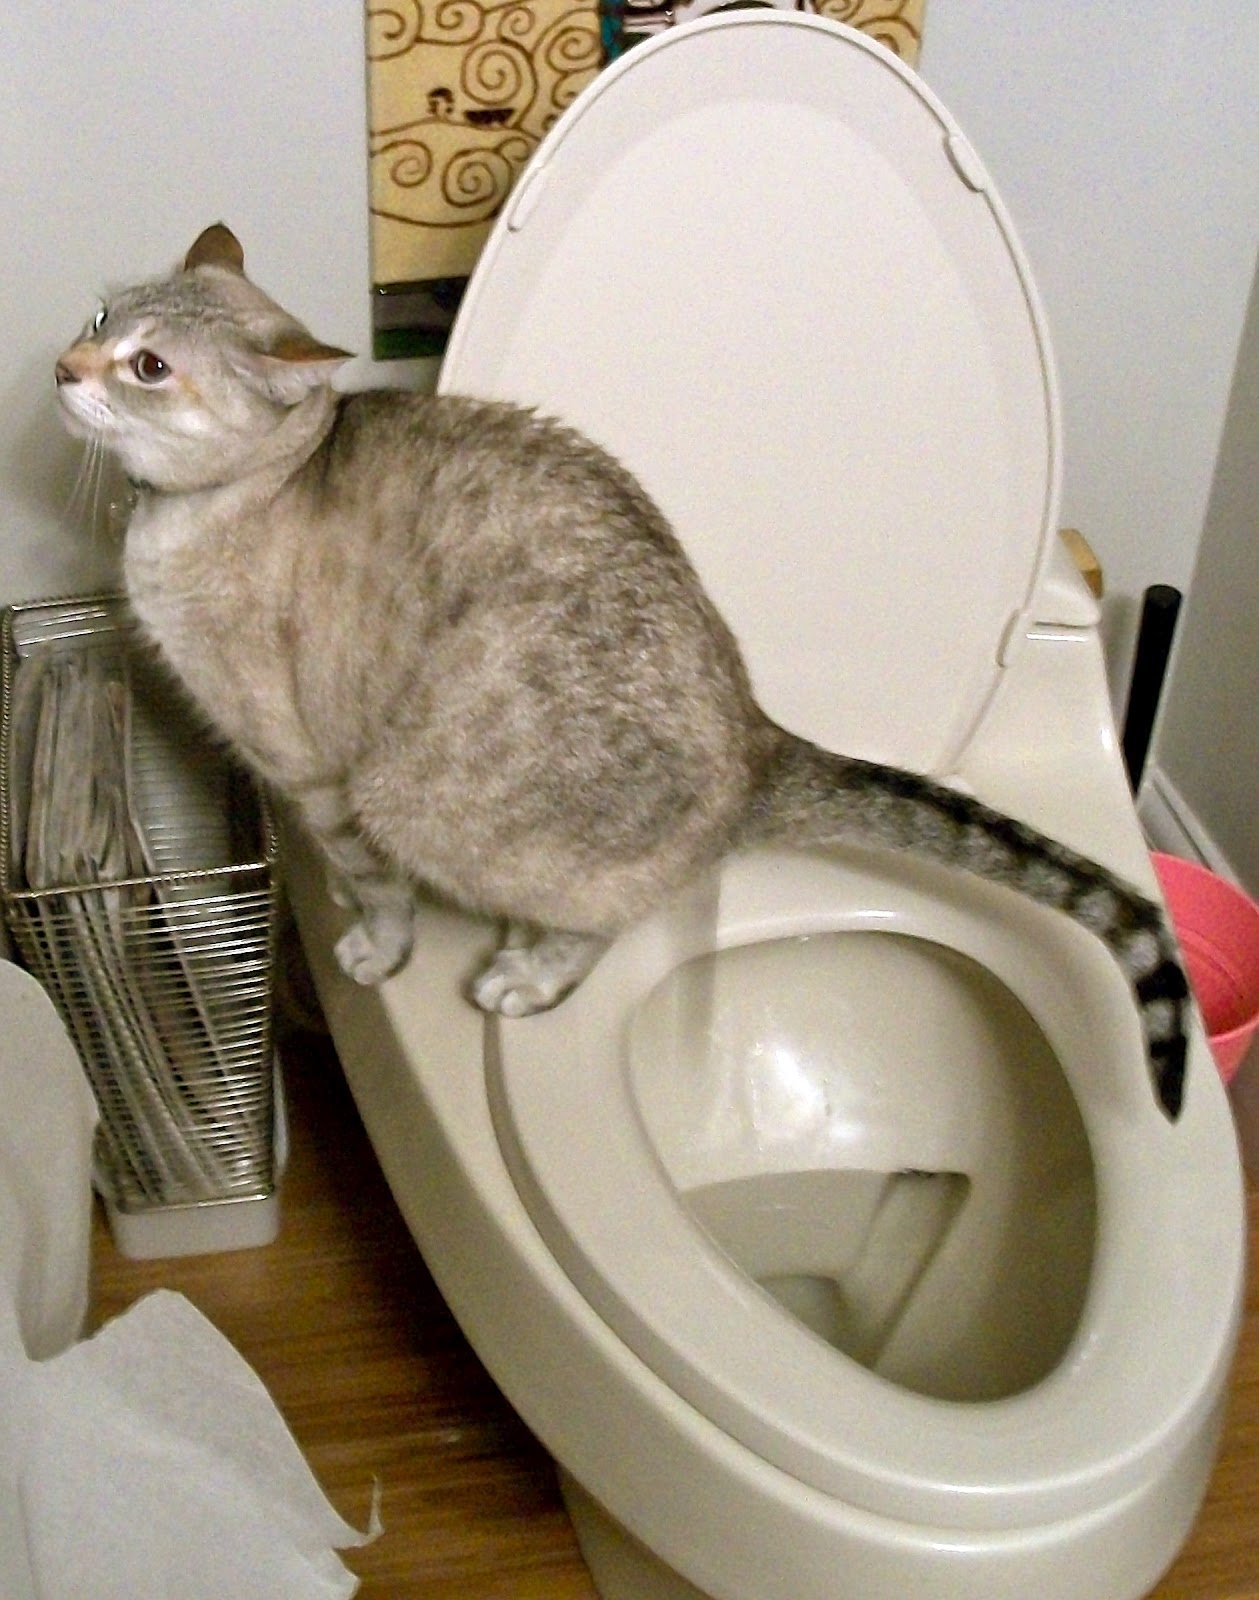 Most Adorable Toilet Using Cats!